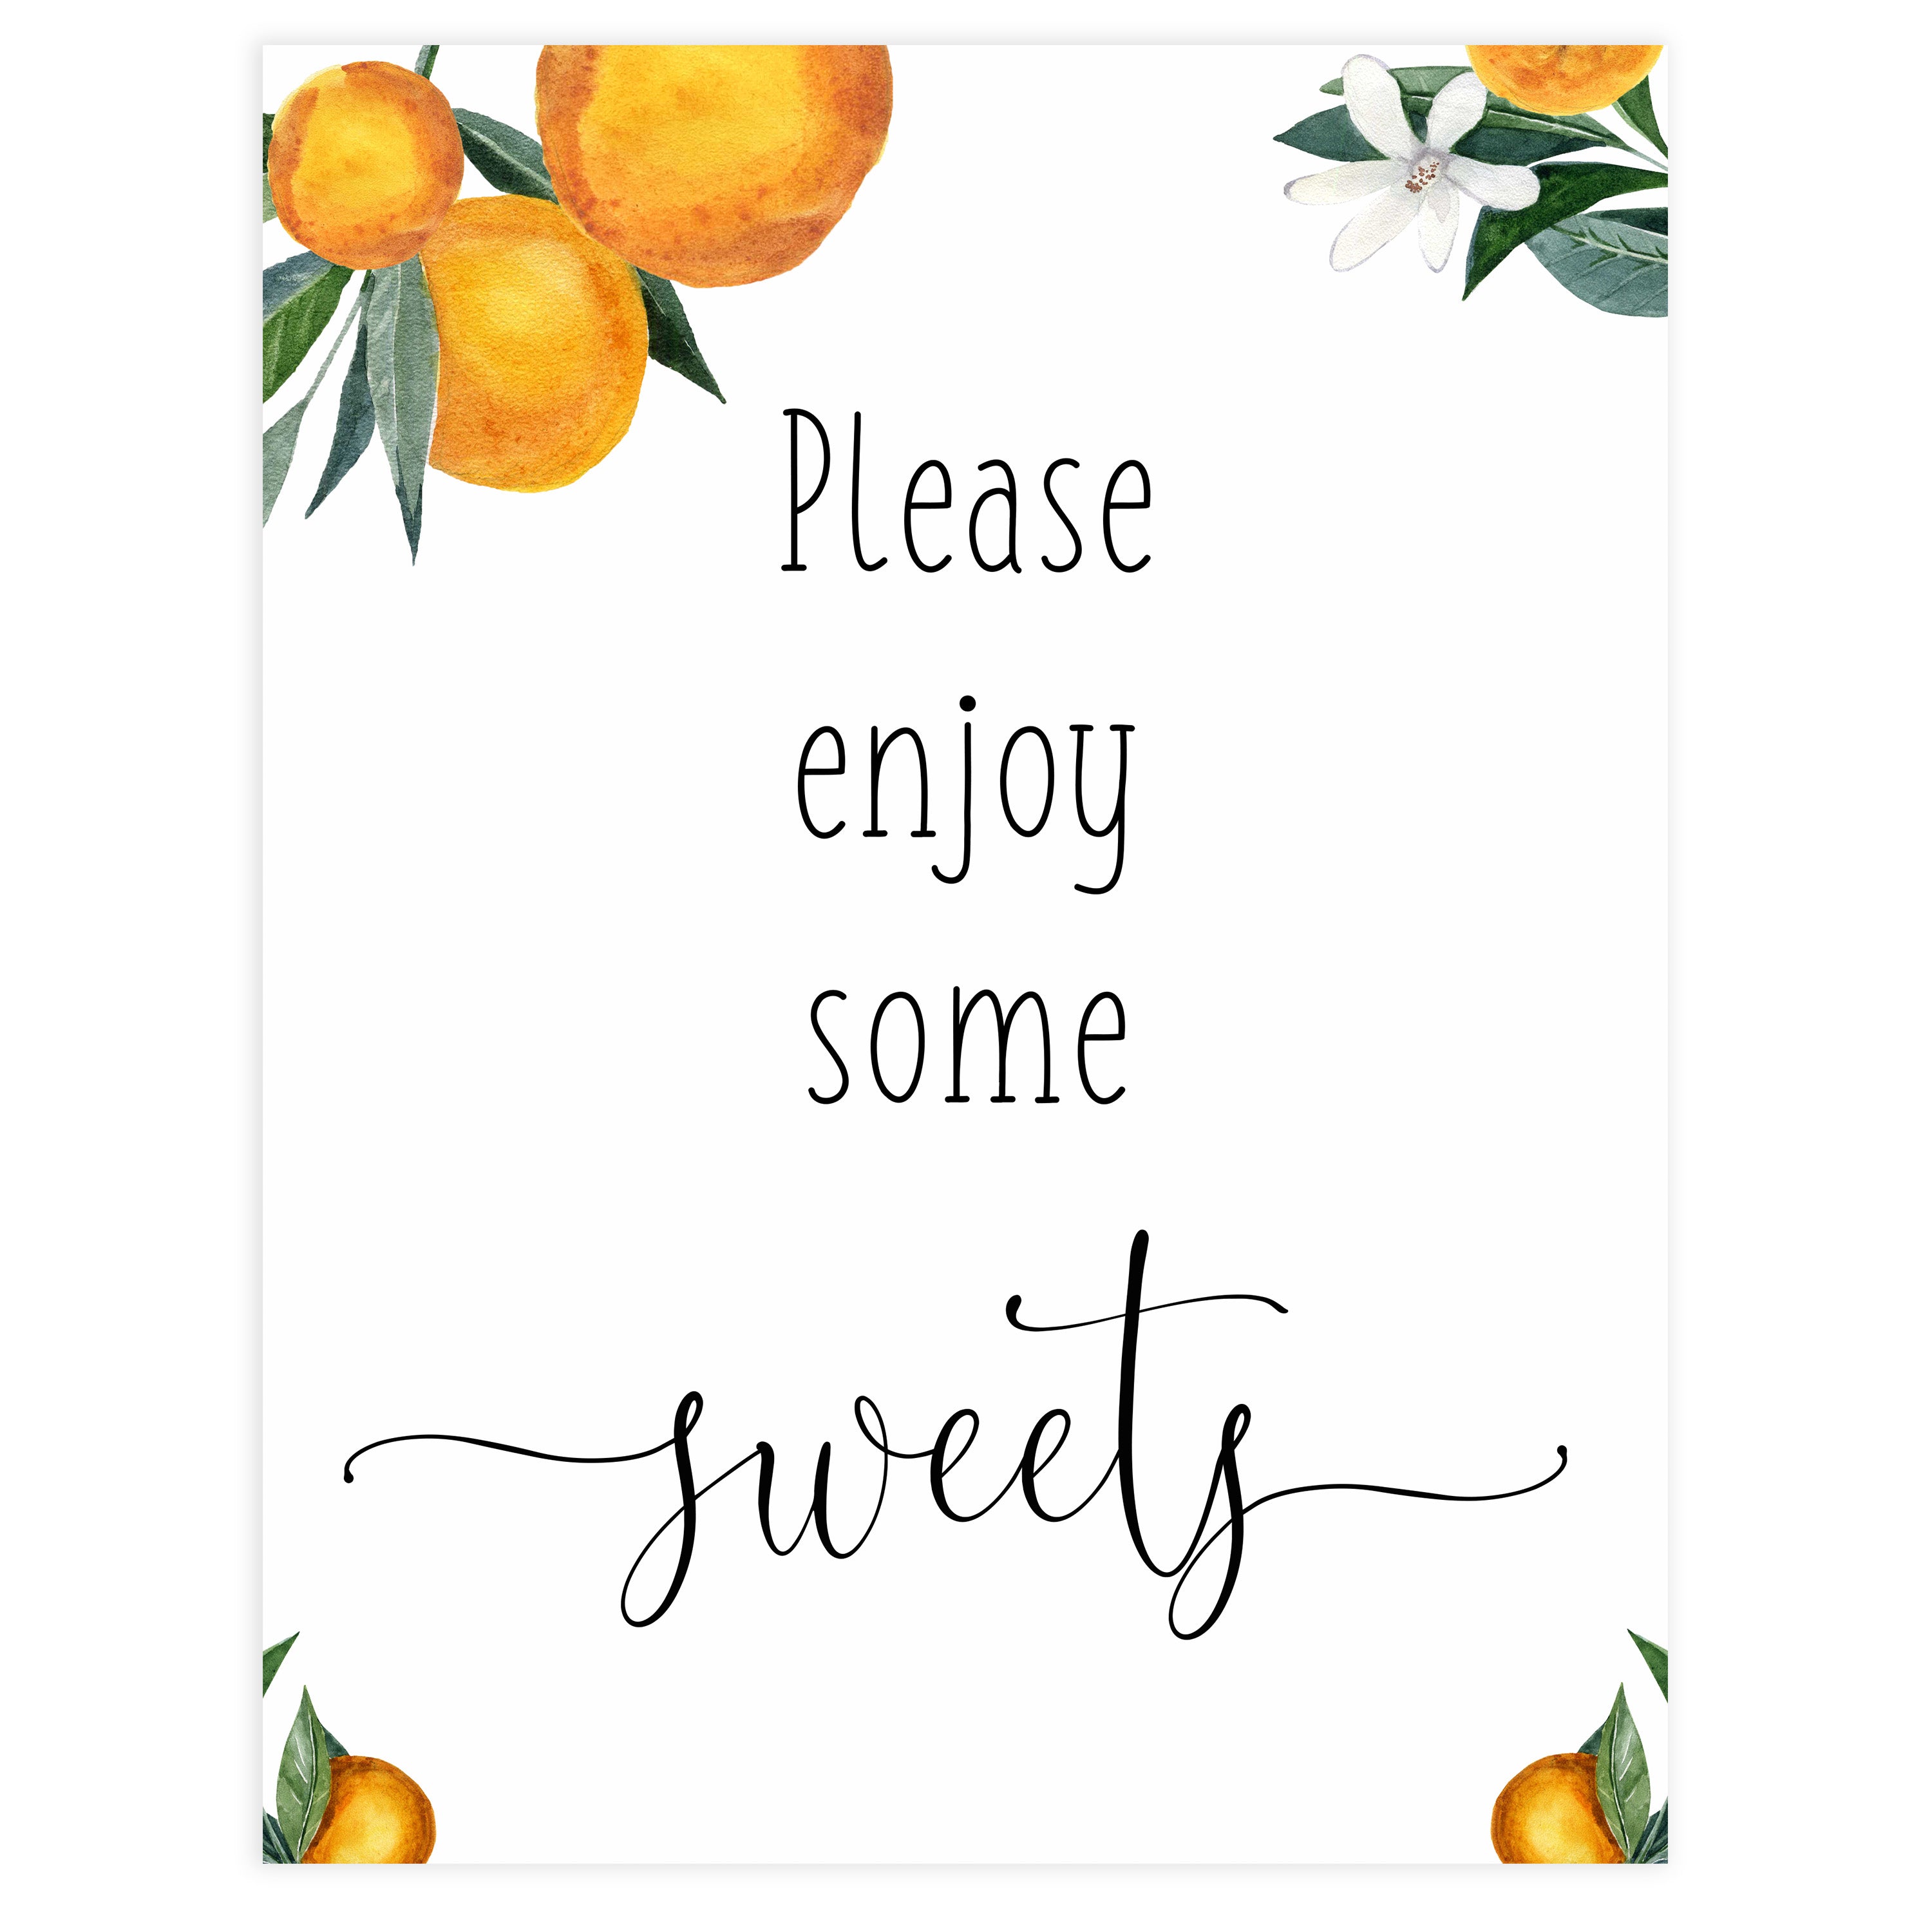 sweets baby shower table sign, Little cutie baby decor, printable baby table signs, printable baby decor, baby little cutie table signs, fun baby signs, baby little cutie fun baby table signs, citrus baby shower signs,